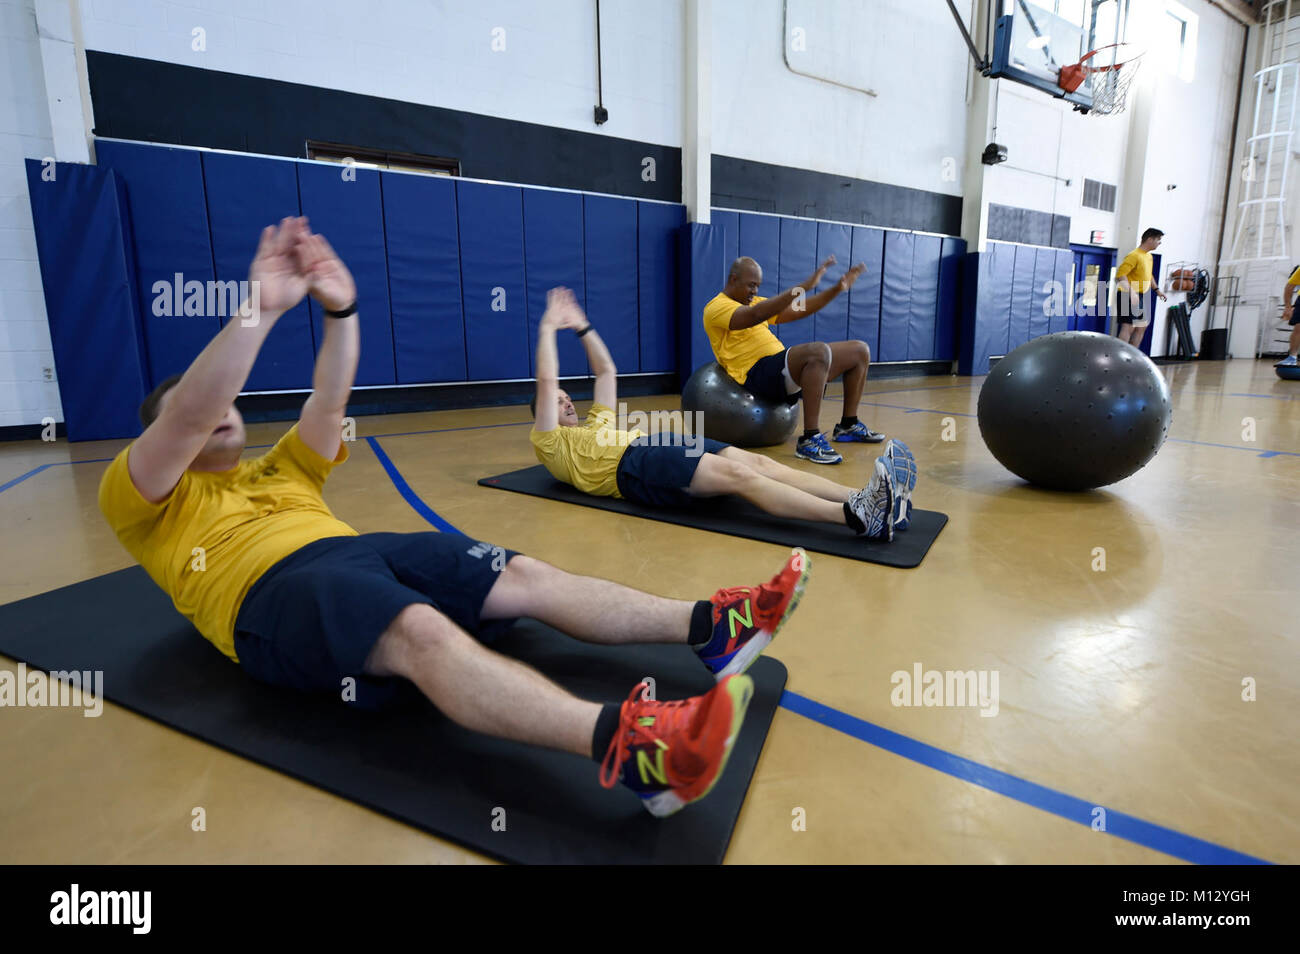 Fla. (Jan. 23, 2018) Center for Information Warfare Training (CIWT) staff participate in command physical fitness session inside the Wenzel Fitness Center on board Naval Air Station Pensacola Corry Station, Florida. CIWT staff takes physical fitness seriously and regularly trains together to maintain readiness. (U.S. Navy Stock Photo